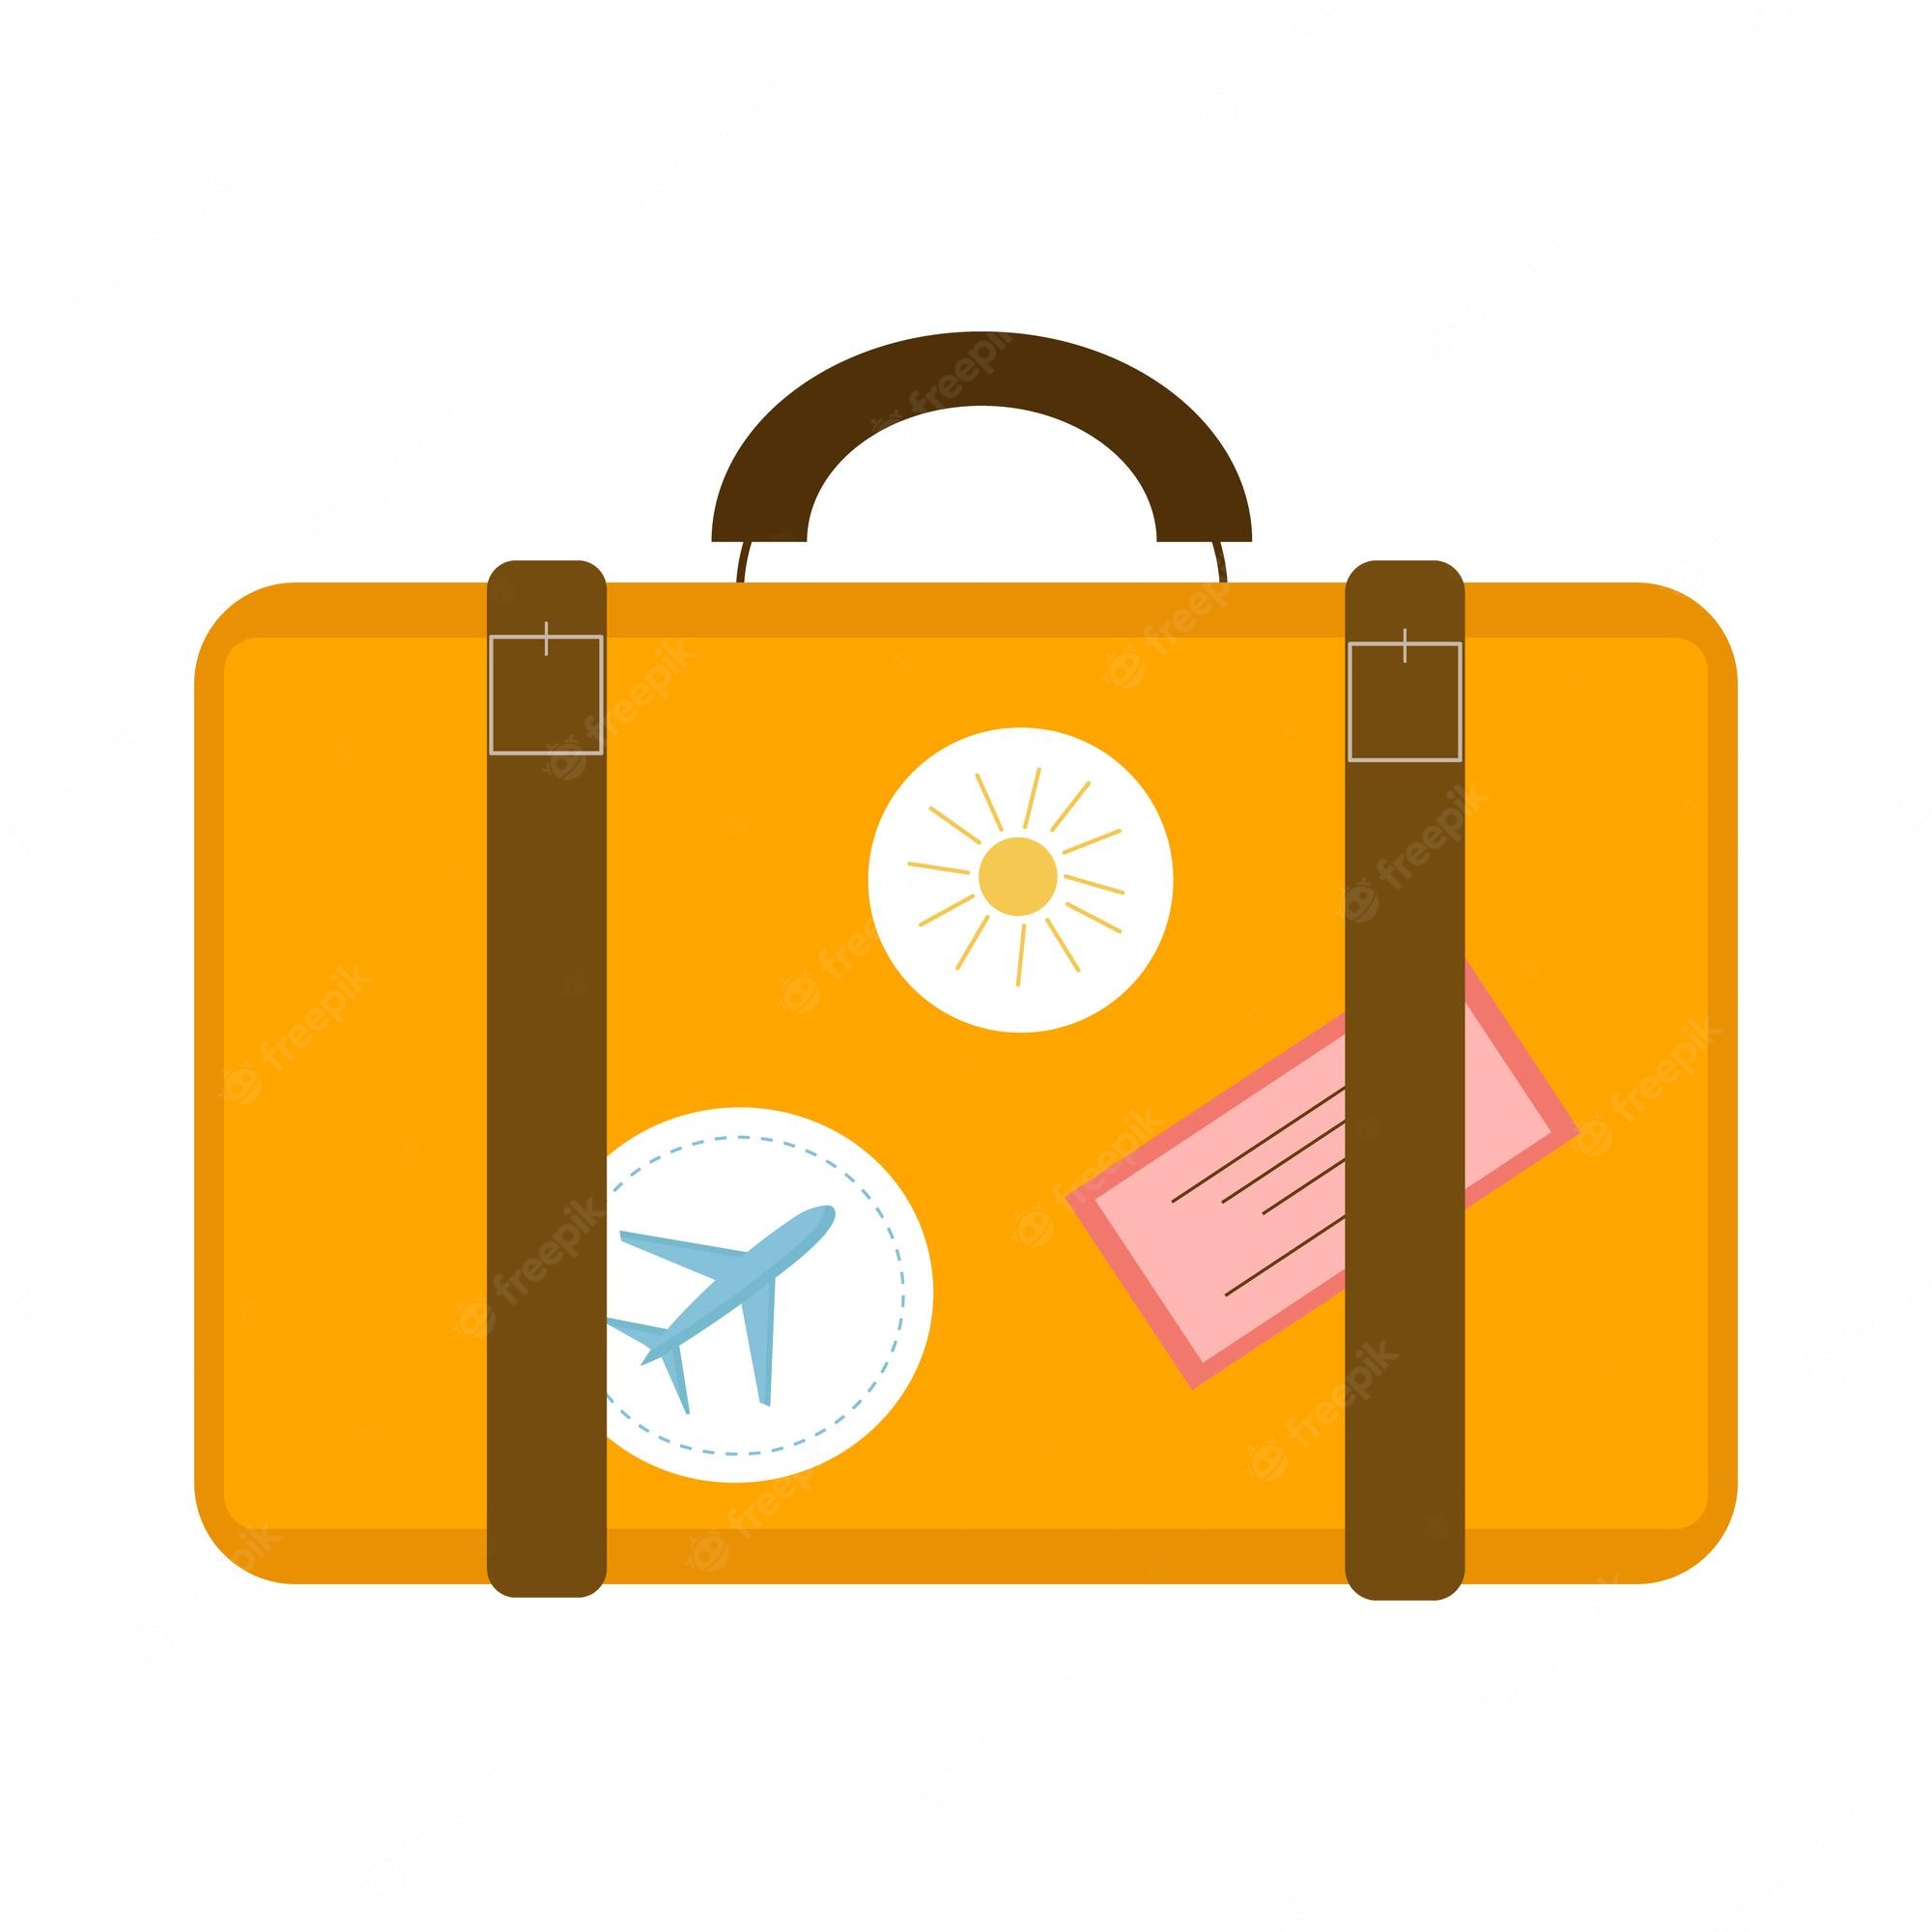 Luggage Outline Clipart Suitcase Baggage Clip Art - Shape Suitcase ...